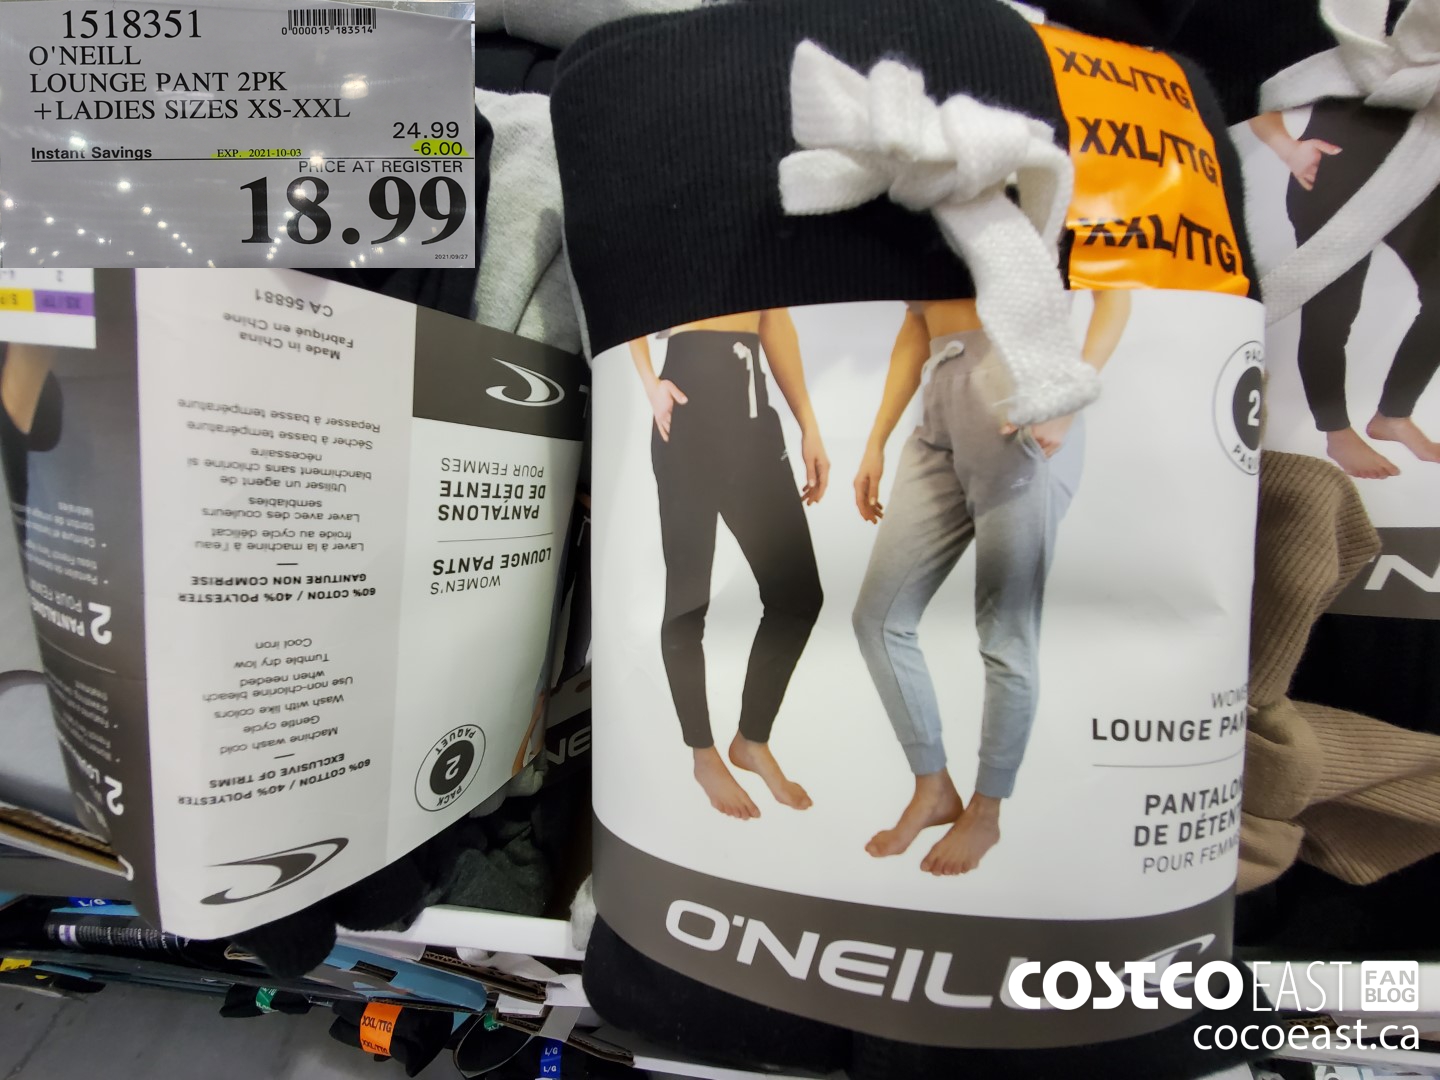 1518351 O NEILL LOUNGE PANT 2PK LADIES SIZES XS XXL 6 00 INSTANT SAVINGS  EXPIRES ON 2021 10 03 18 99 - Costco East Fan Blog